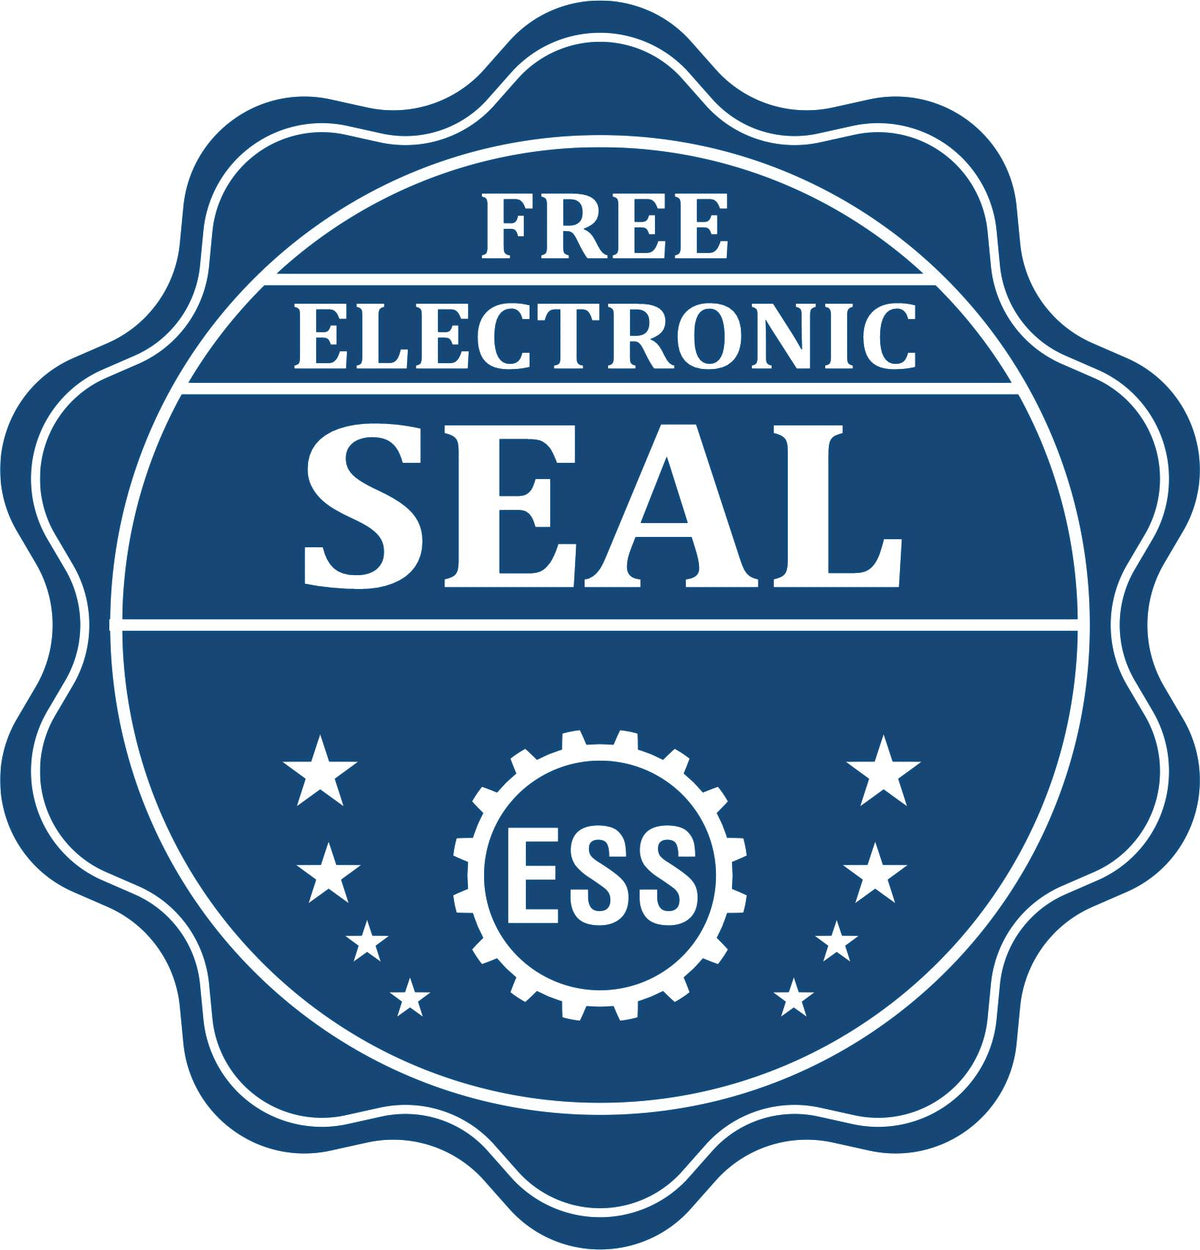 A badge showing a free electronic seal for the Alaska Engineer Desk Seal with stars and the ESS gear on the emblem.